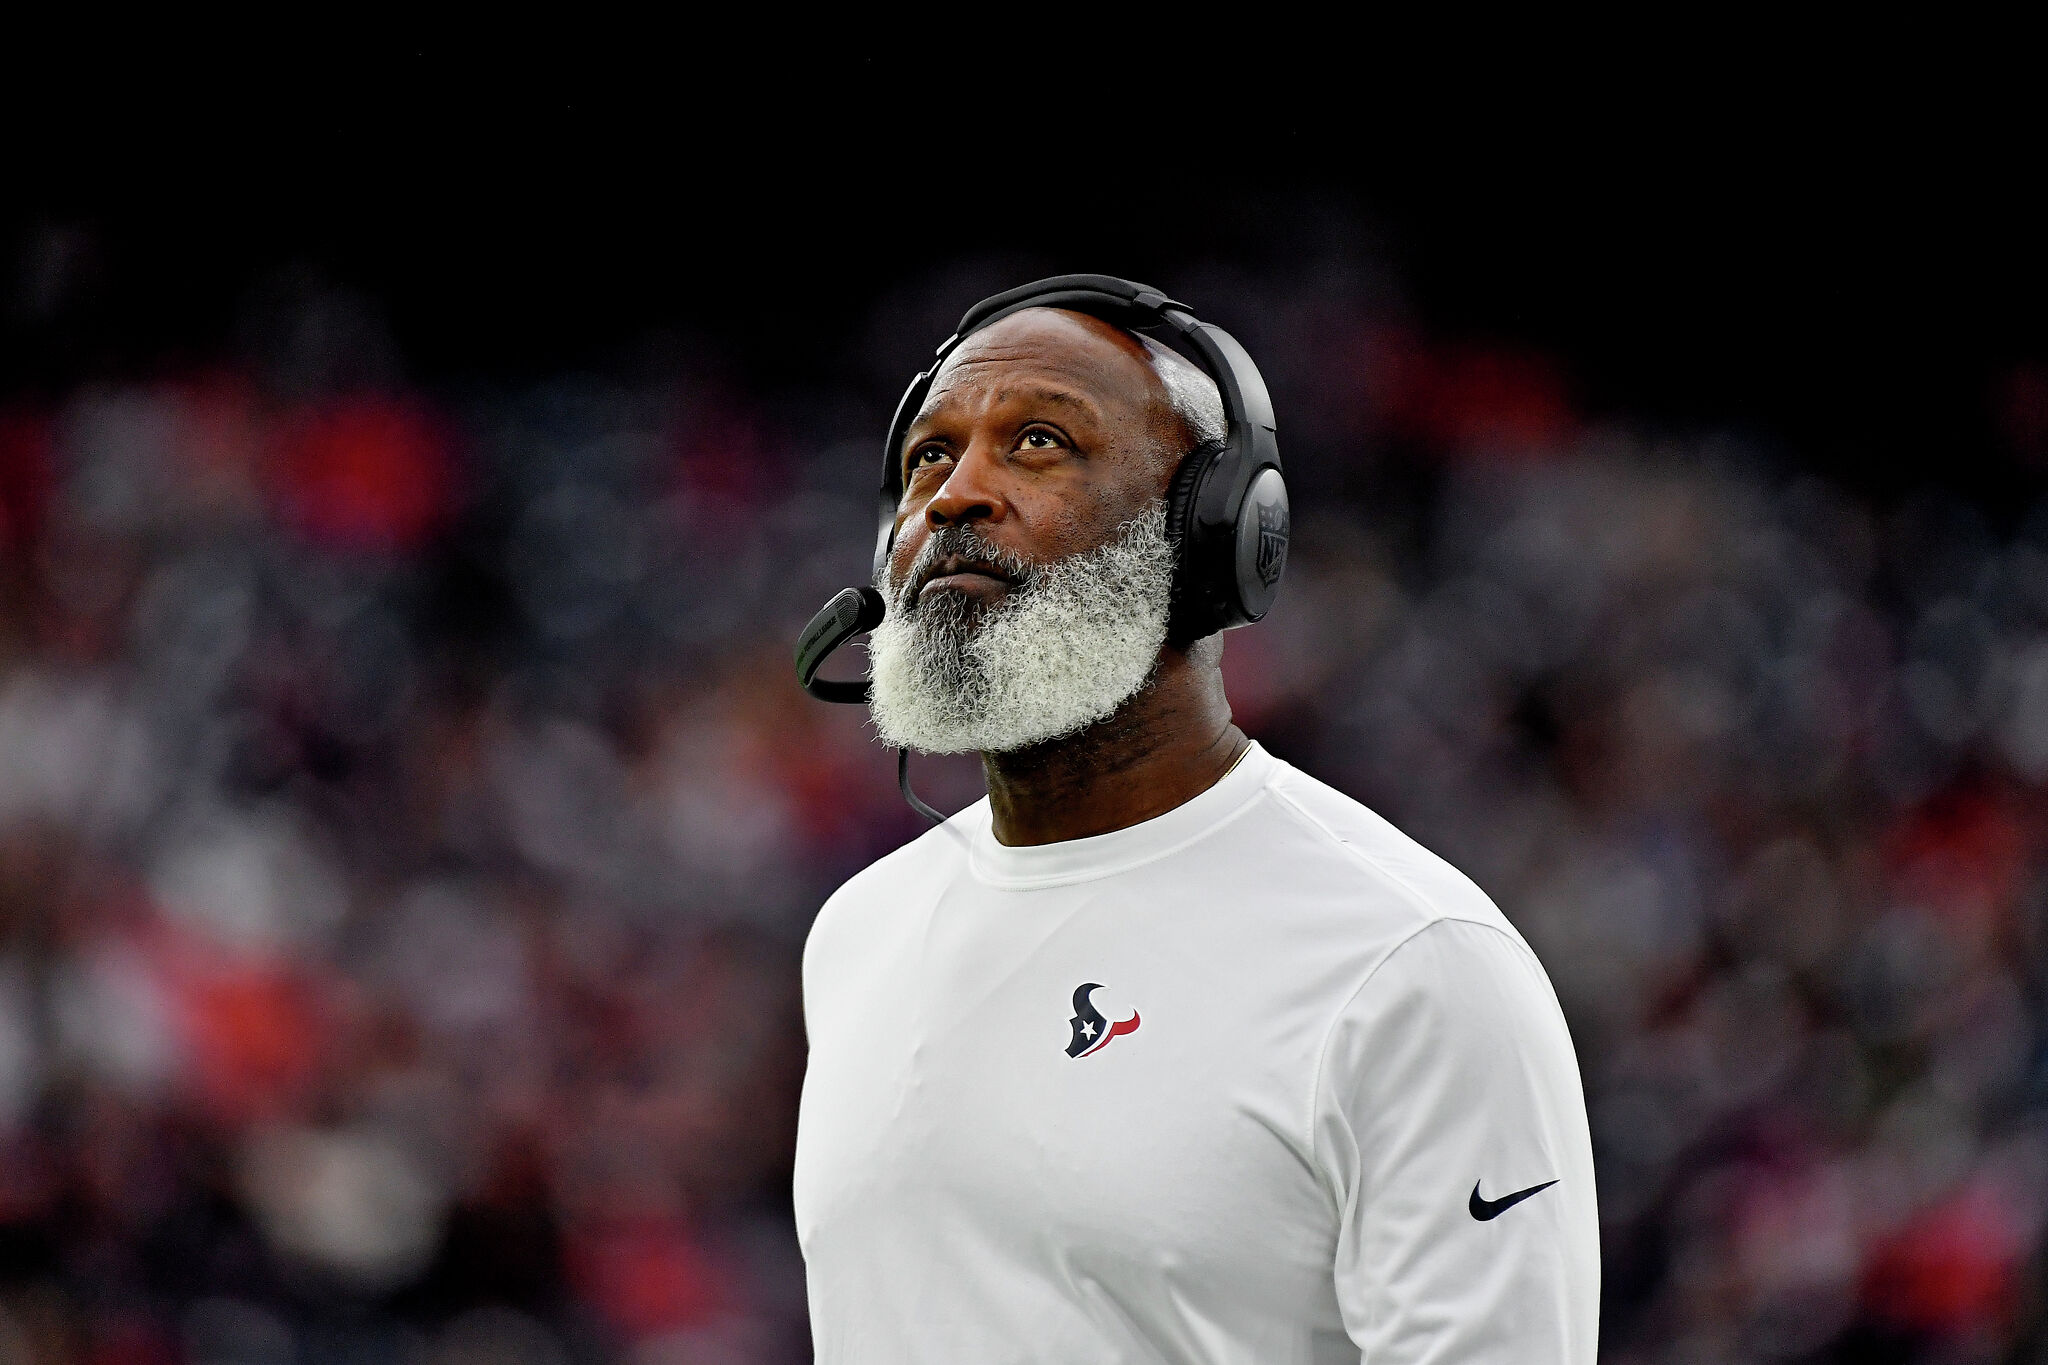 Lovie Smith firing highlights what Black coaches face in NFL